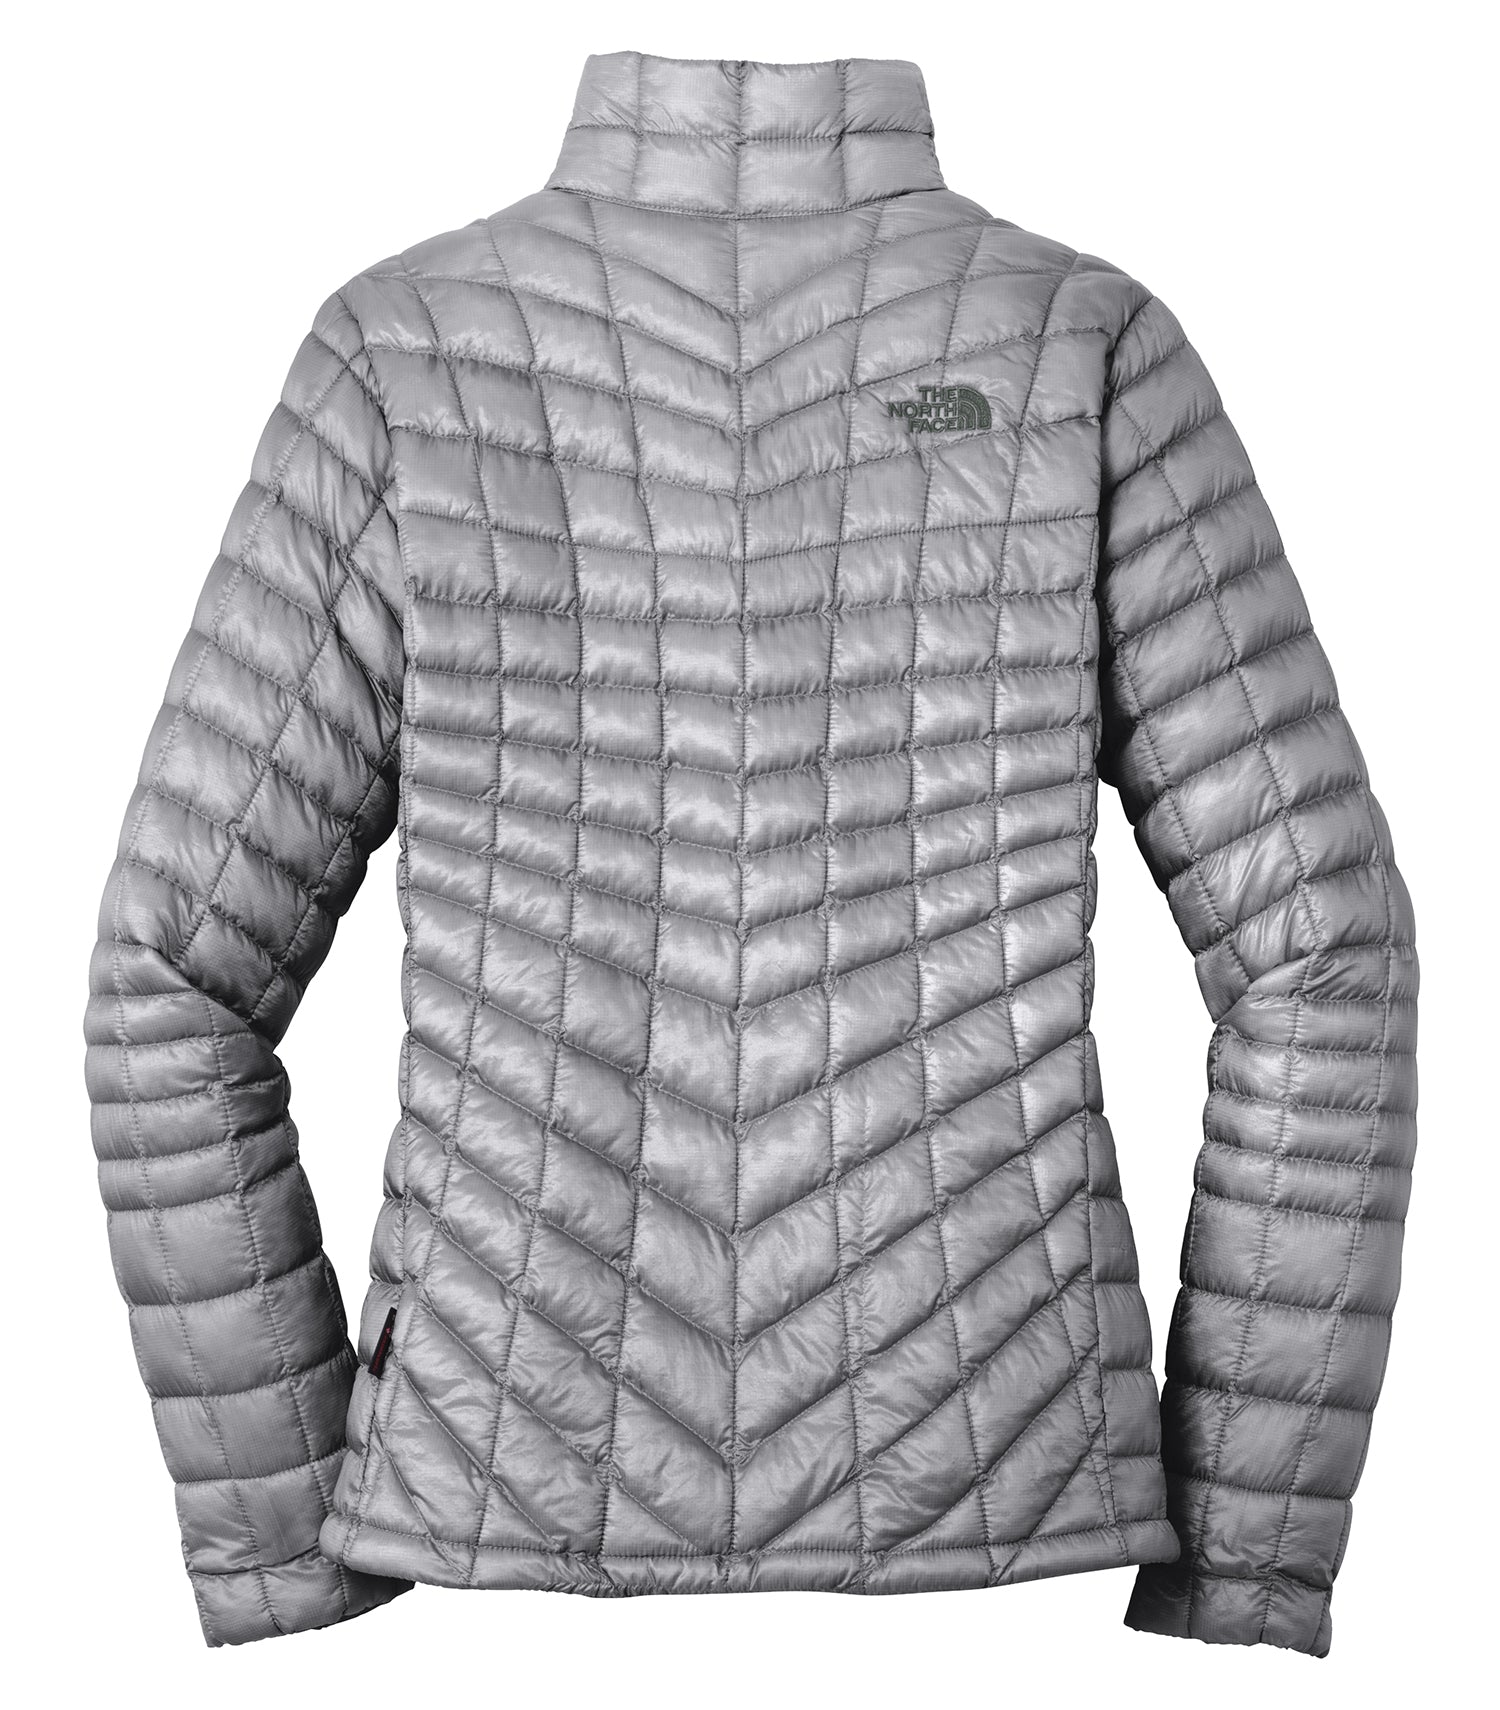 Onthekorner x The North Face® Grey Thermoball Trekker Ladies Jacket